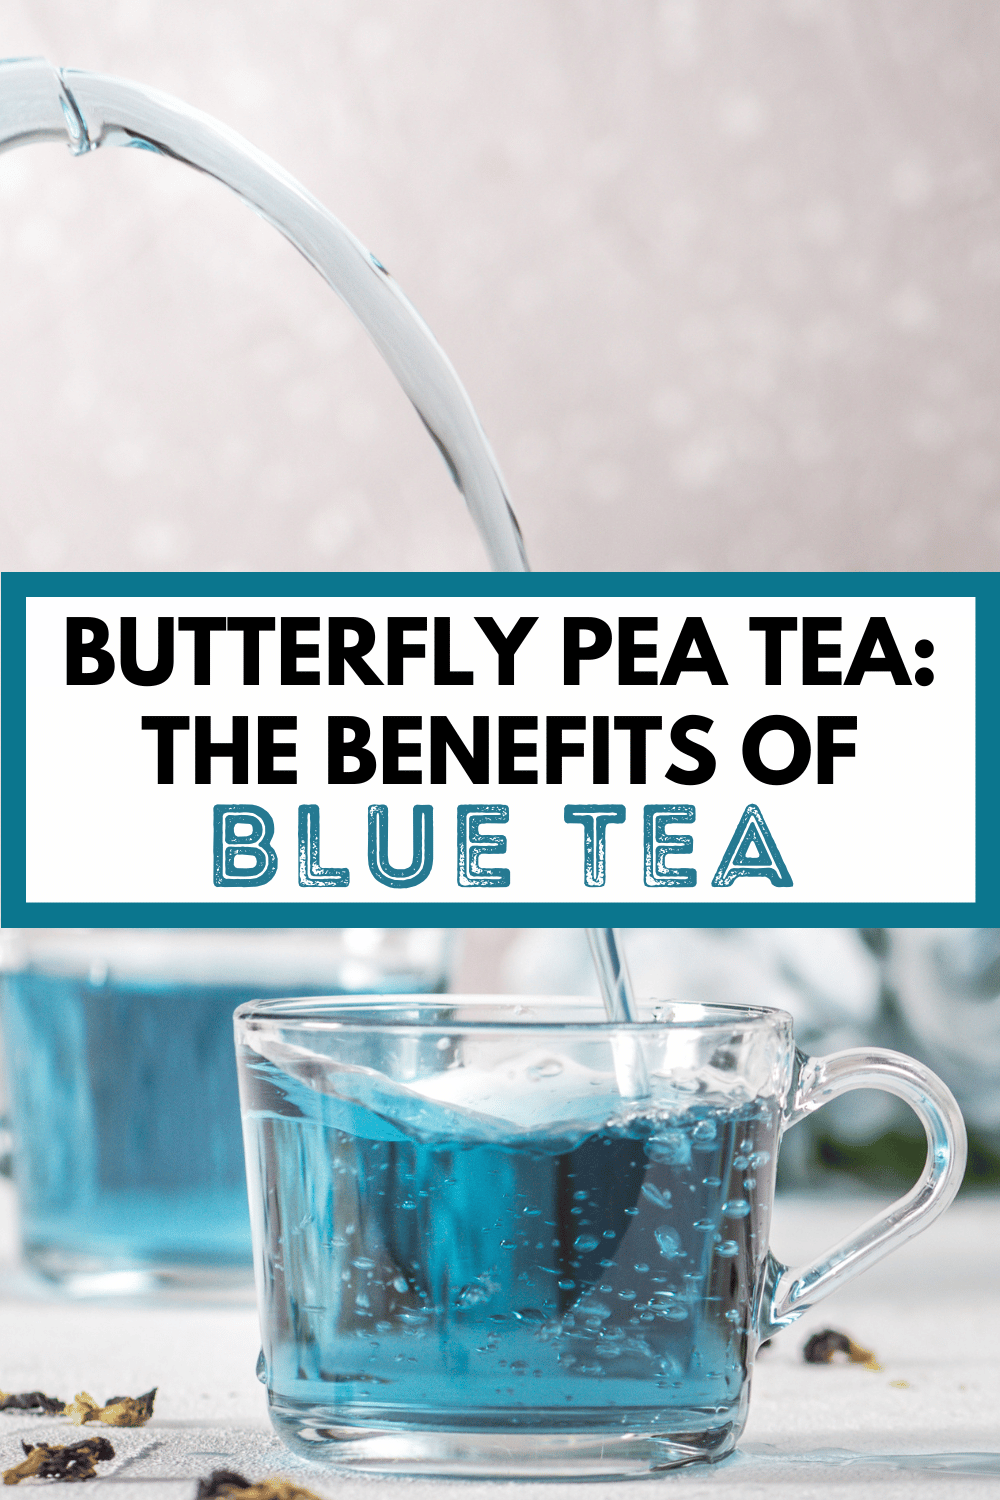 pouring a glass mug of pale blue tea with text, "butterfly pea tea: the benefits of blue tea"